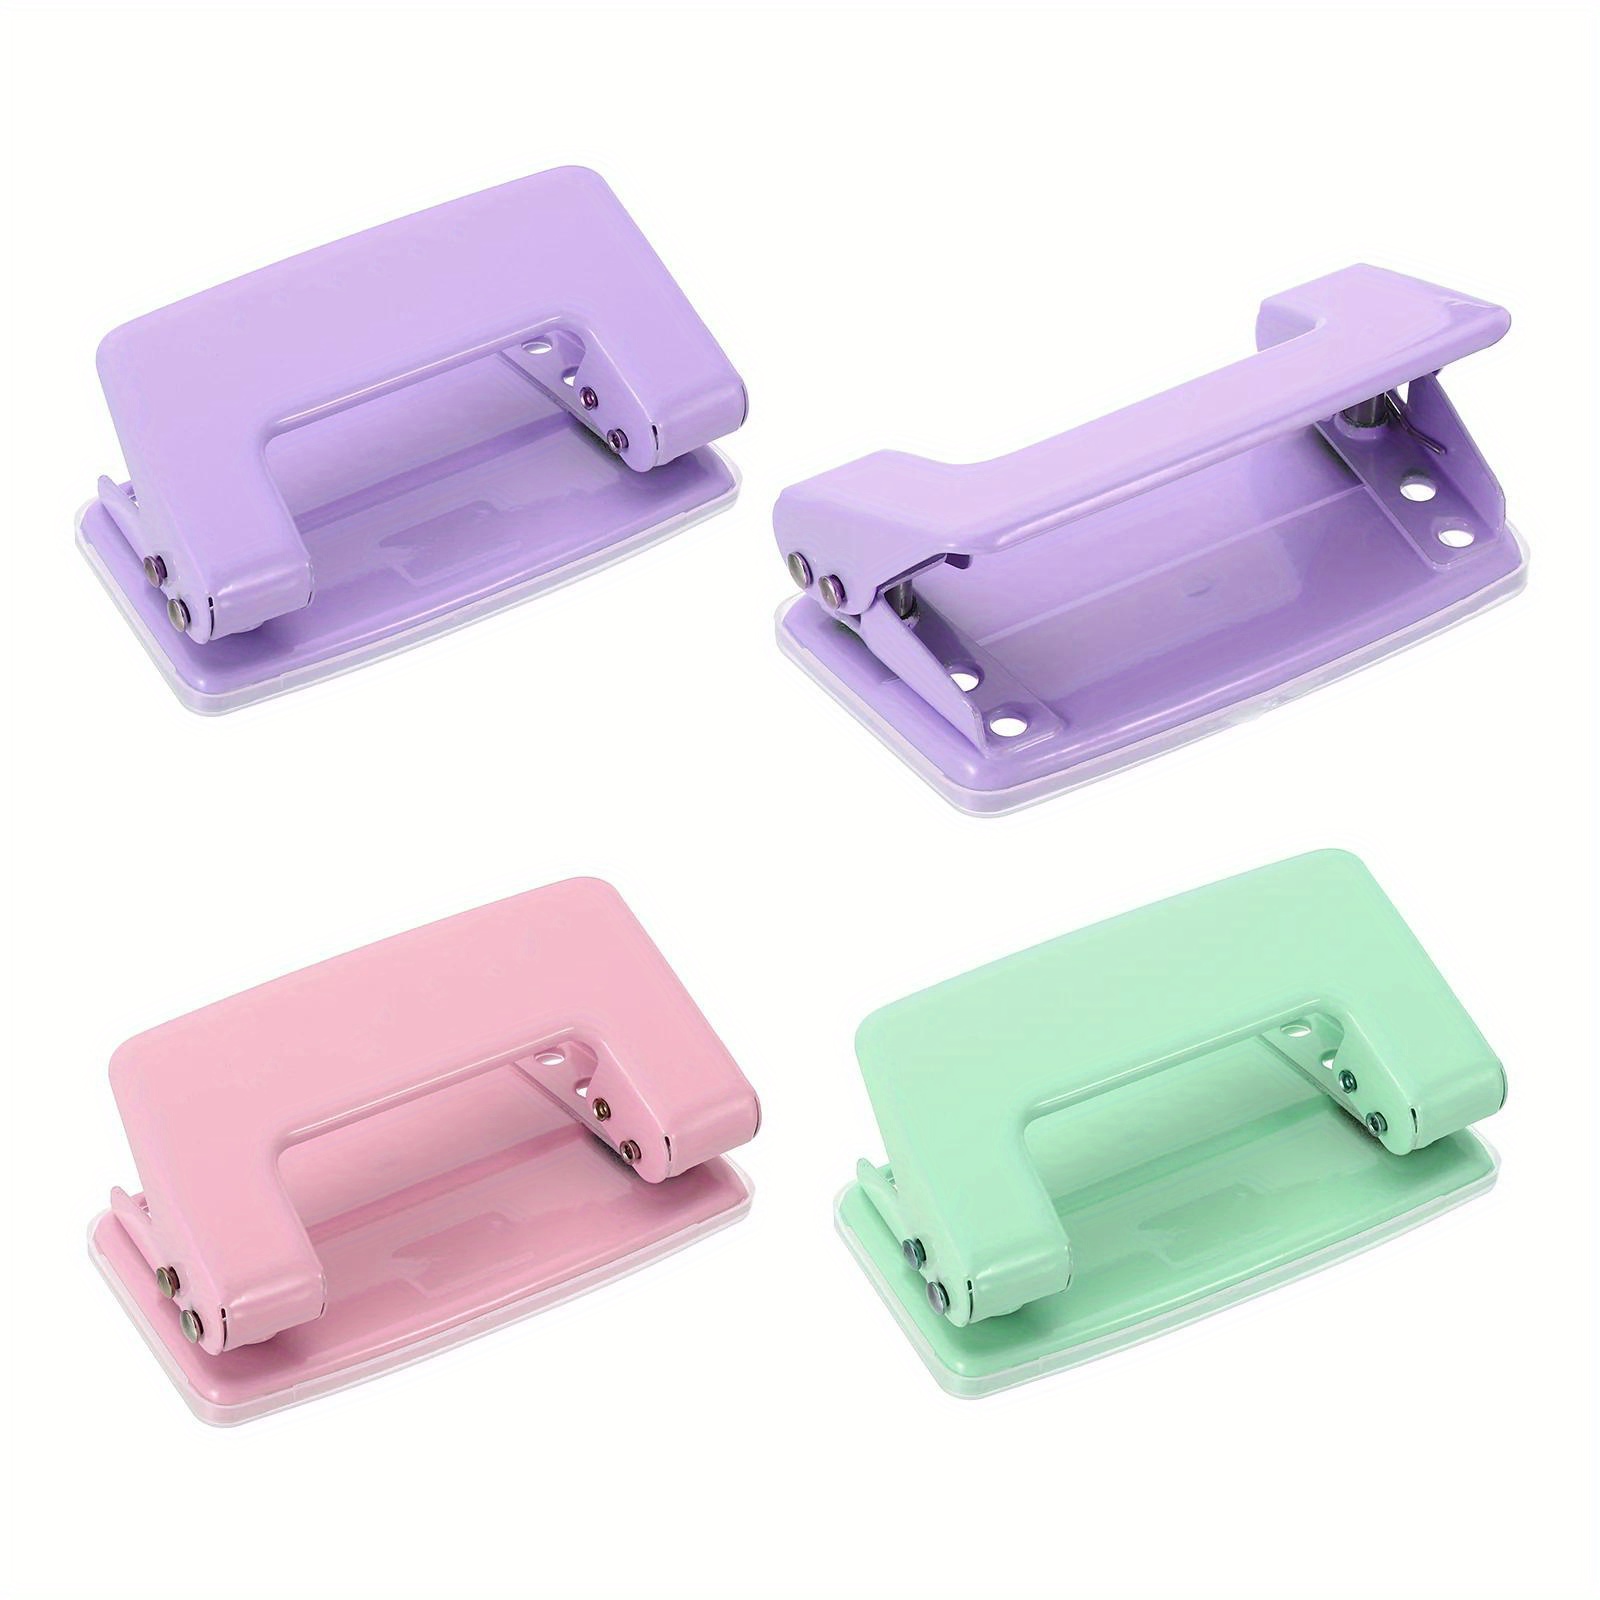 

1/4" 2-hole Puncher, Double Hole Punch, Portable Manual Puncher, Office Binding Supplies, Journal Scrapbook Hole Punch, Useful Stationery